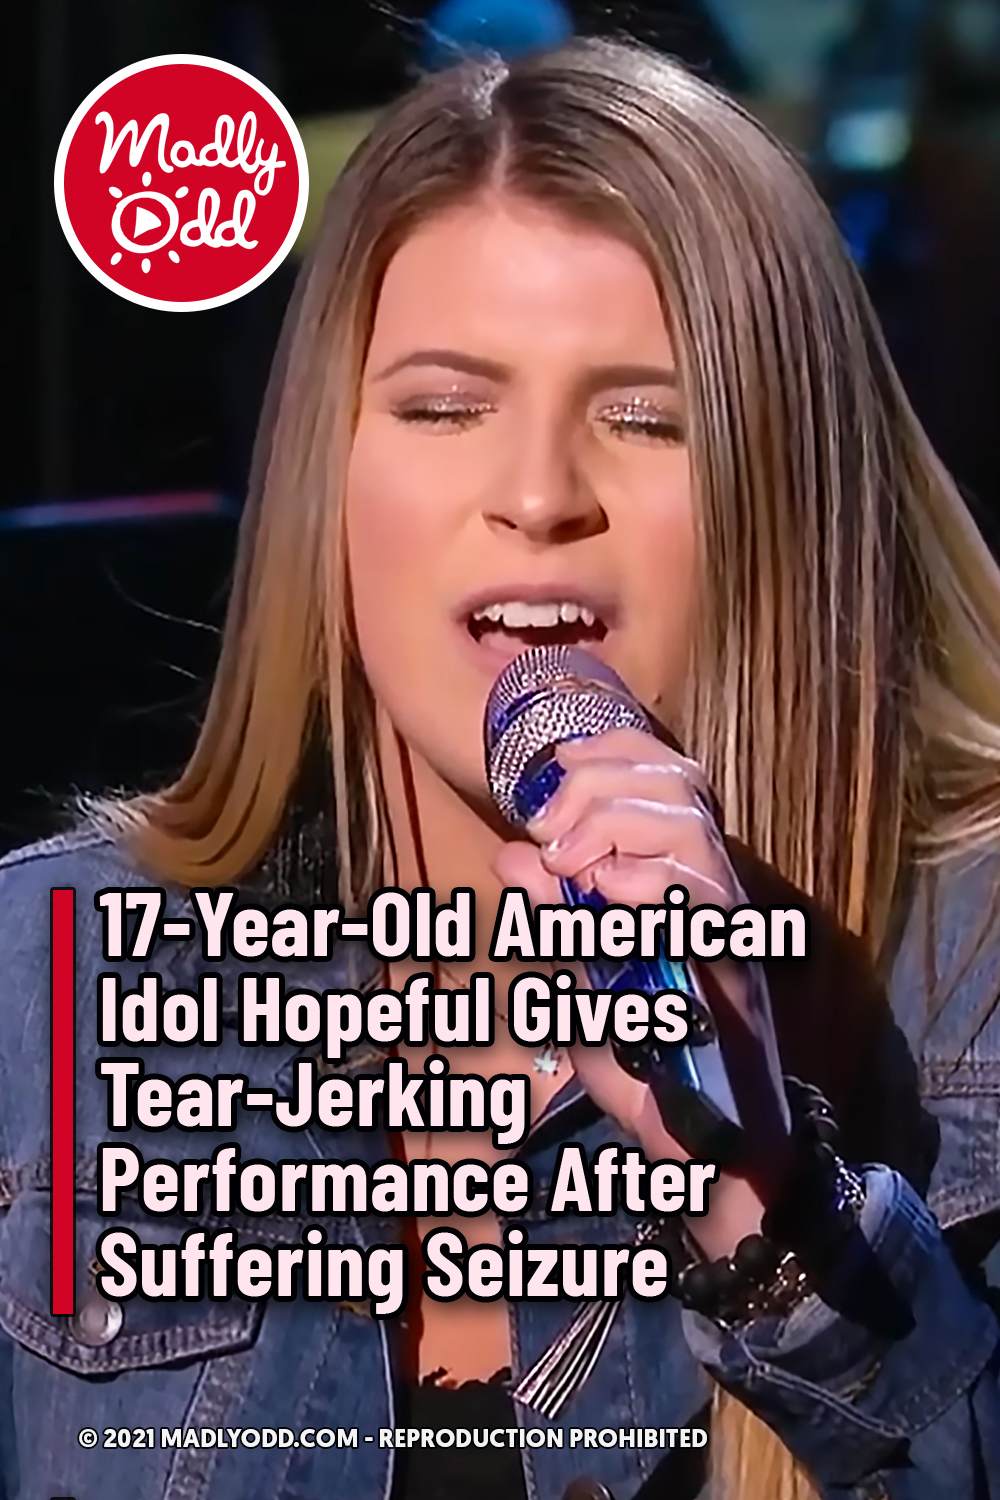 17-Year-Old American Idol Hopeful Gives Tear-Jerking Performance After Suffering Seizure